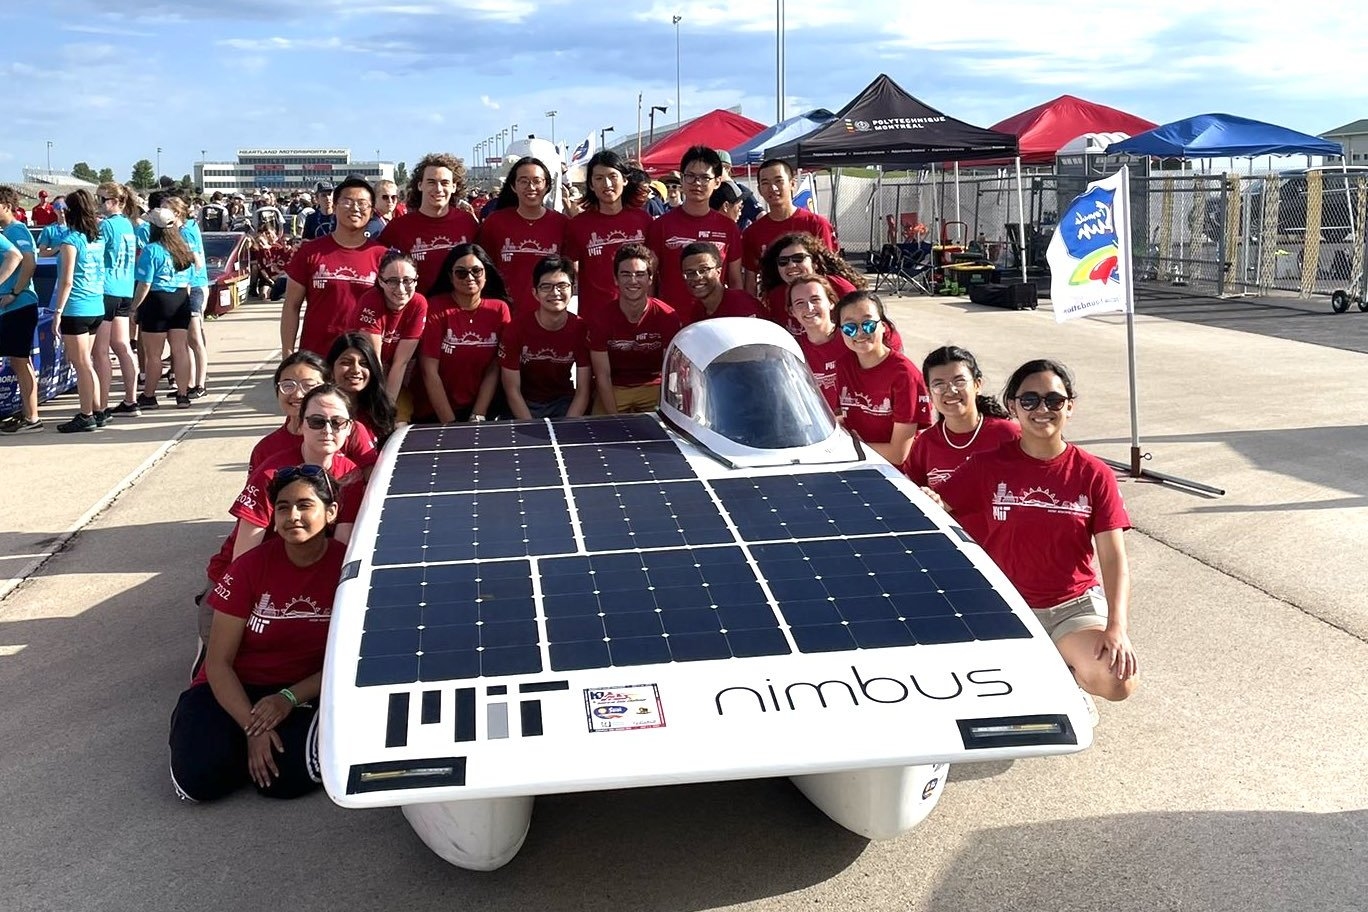 MIT’s solar car team wins American Solar Challenge for the second year in a row